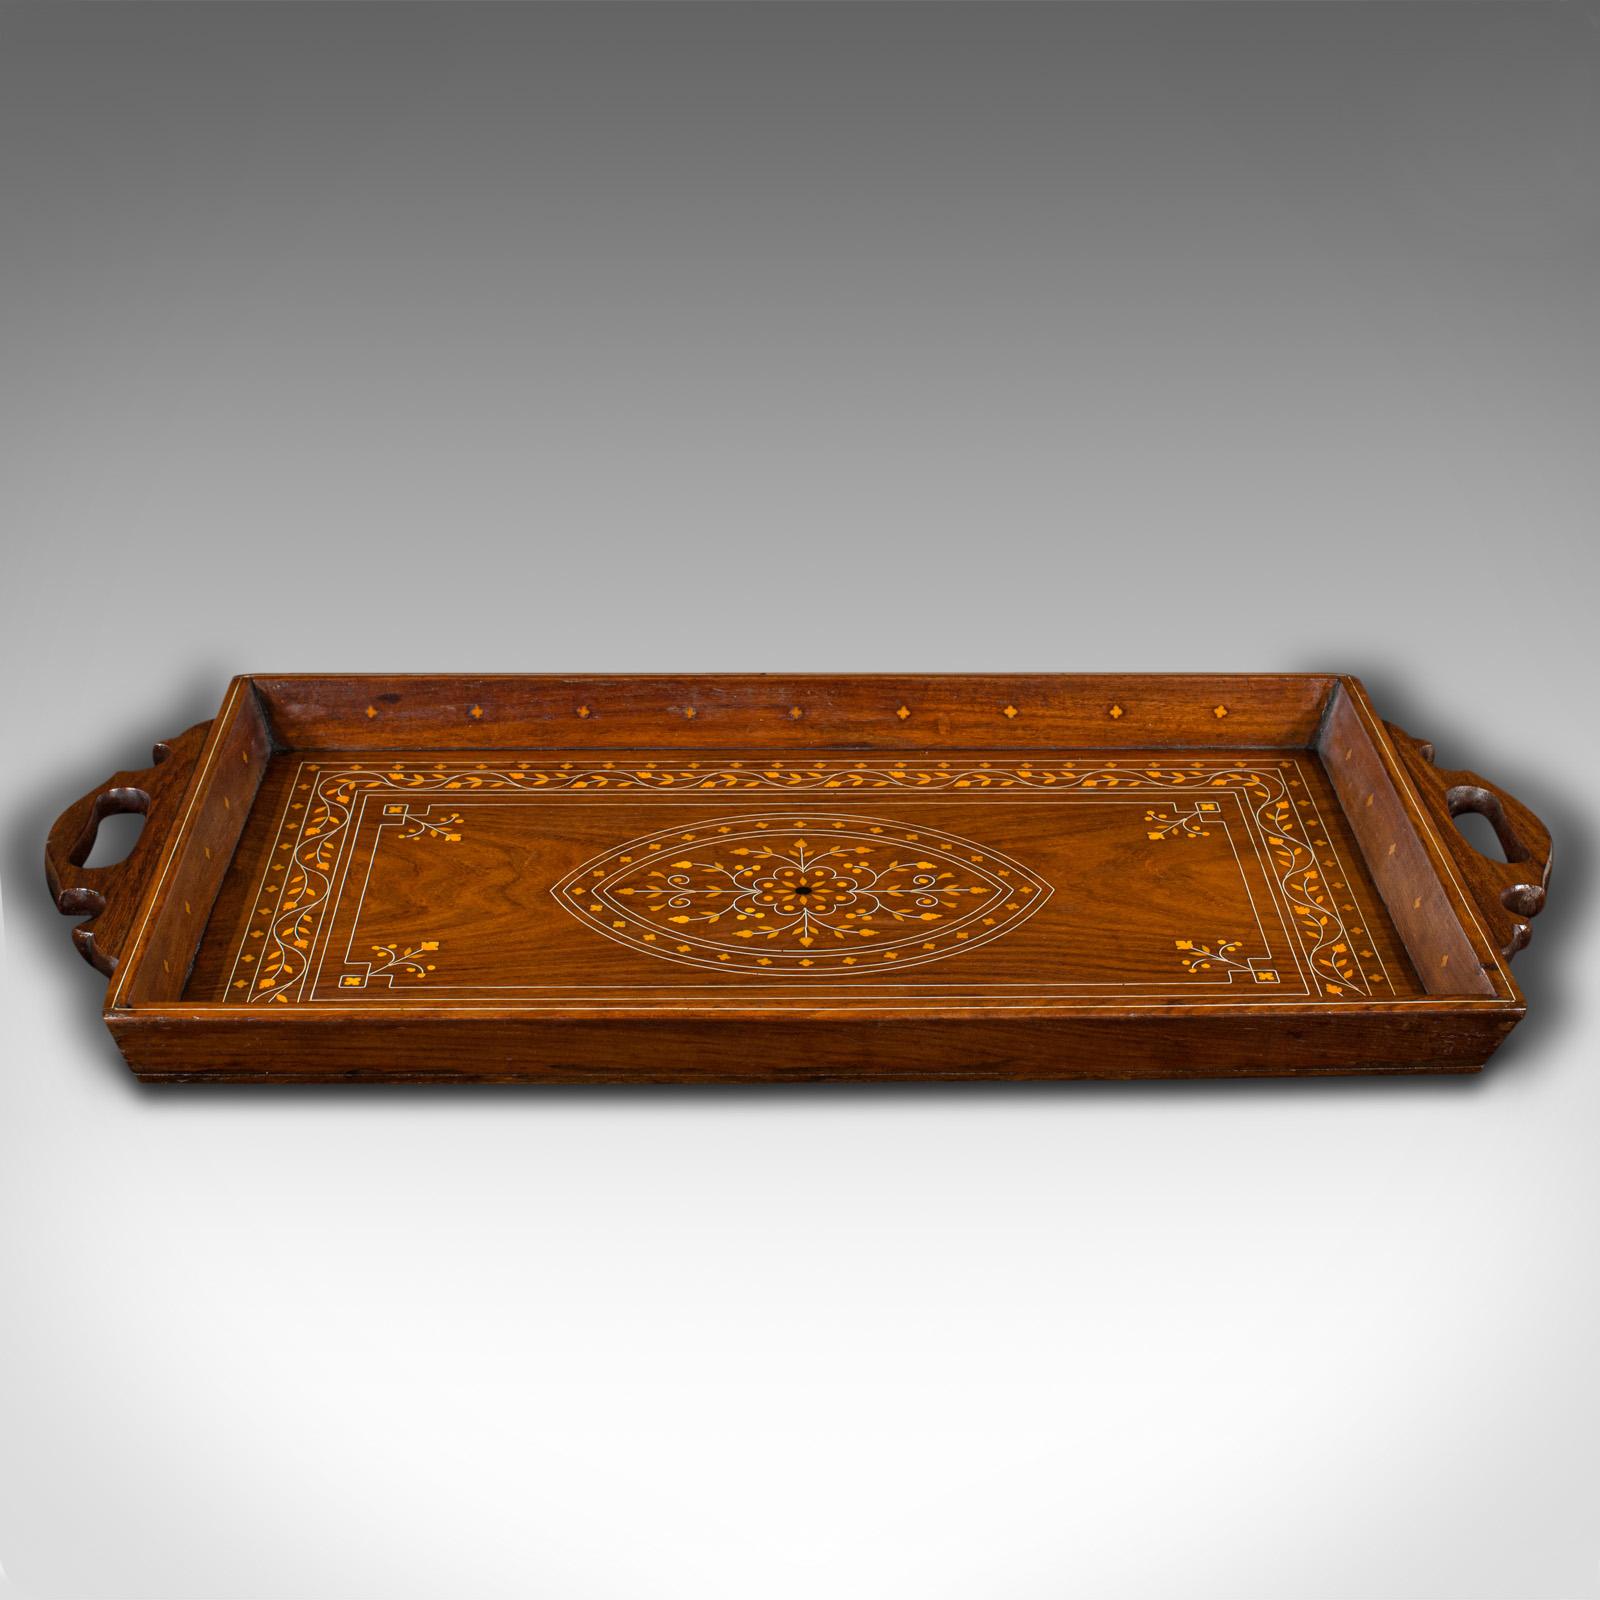 This is a vintage inlaid serving tray. An English, walnut and boxwood afternoon tea slide, dating to the late Art Deco period, circa 1940.

Strikingly inlaid tray with decorative appeal
Displaying a desirable aged patina and in good order
Select